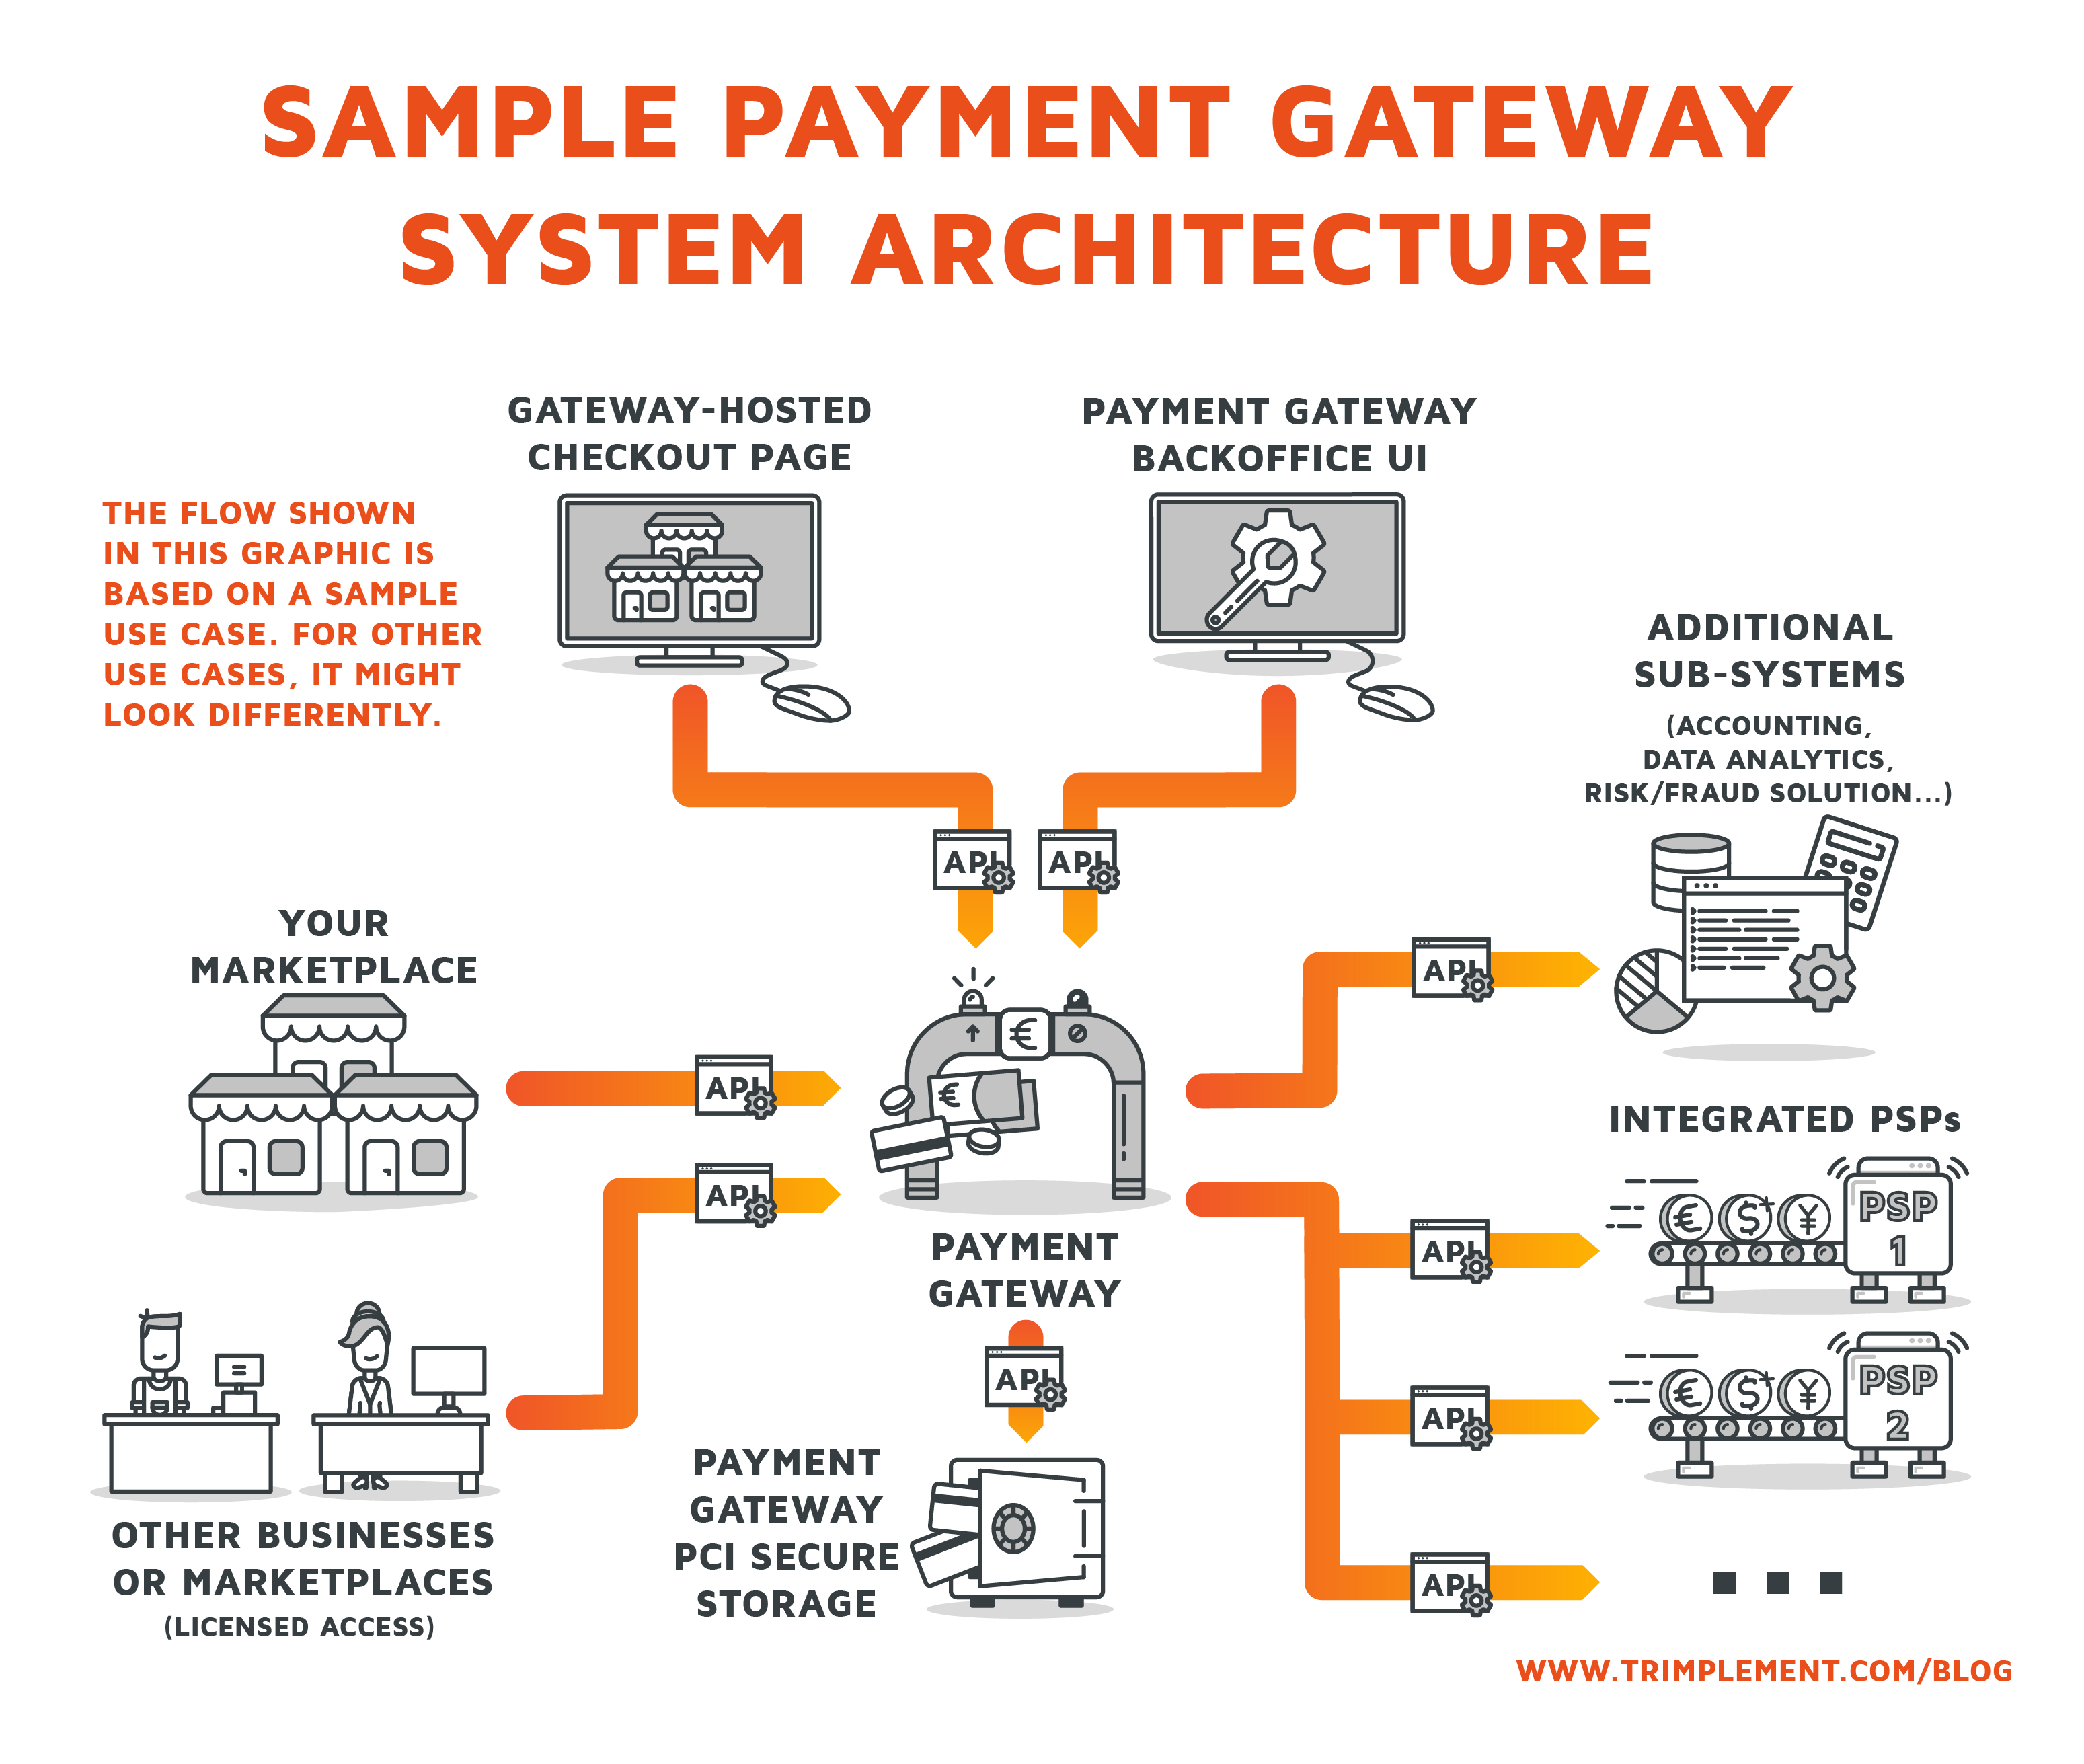 A diagram depicting a sample payment gateway architecture in online marketplace environments, to help with development